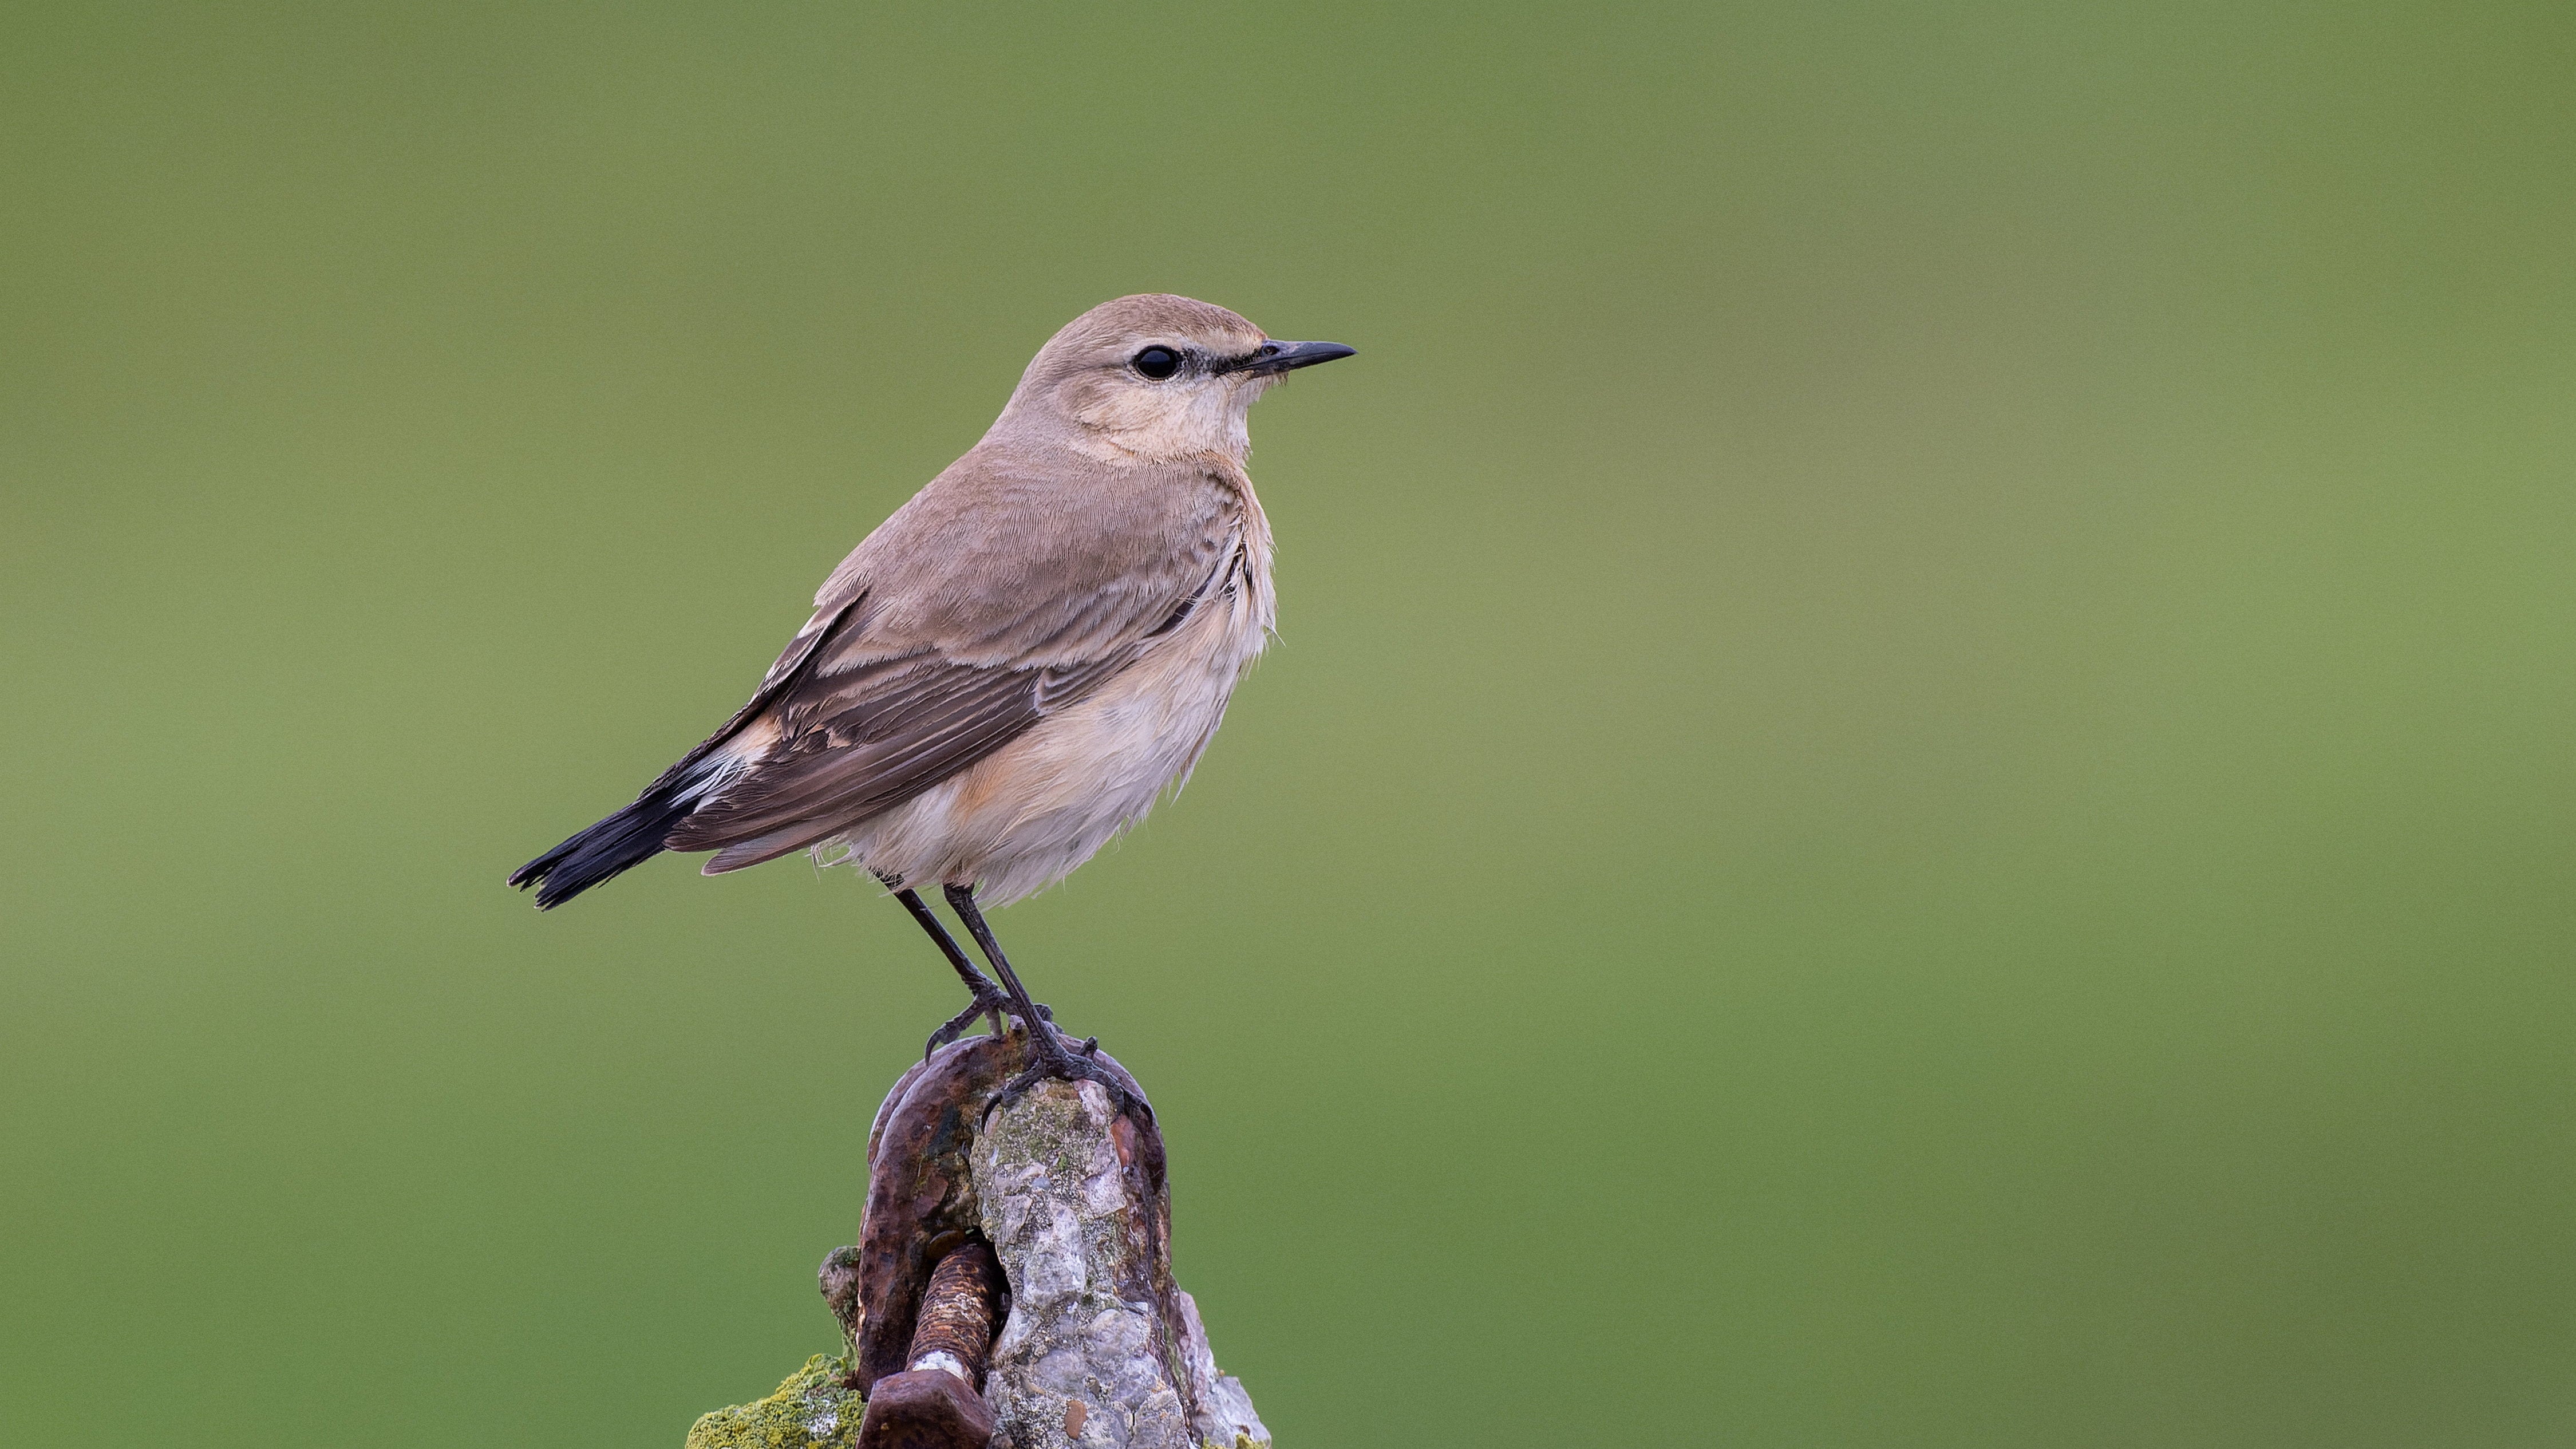 The isabelline wheatear was spotted in Colyford Common, part of Seaton Wetlands in Devon